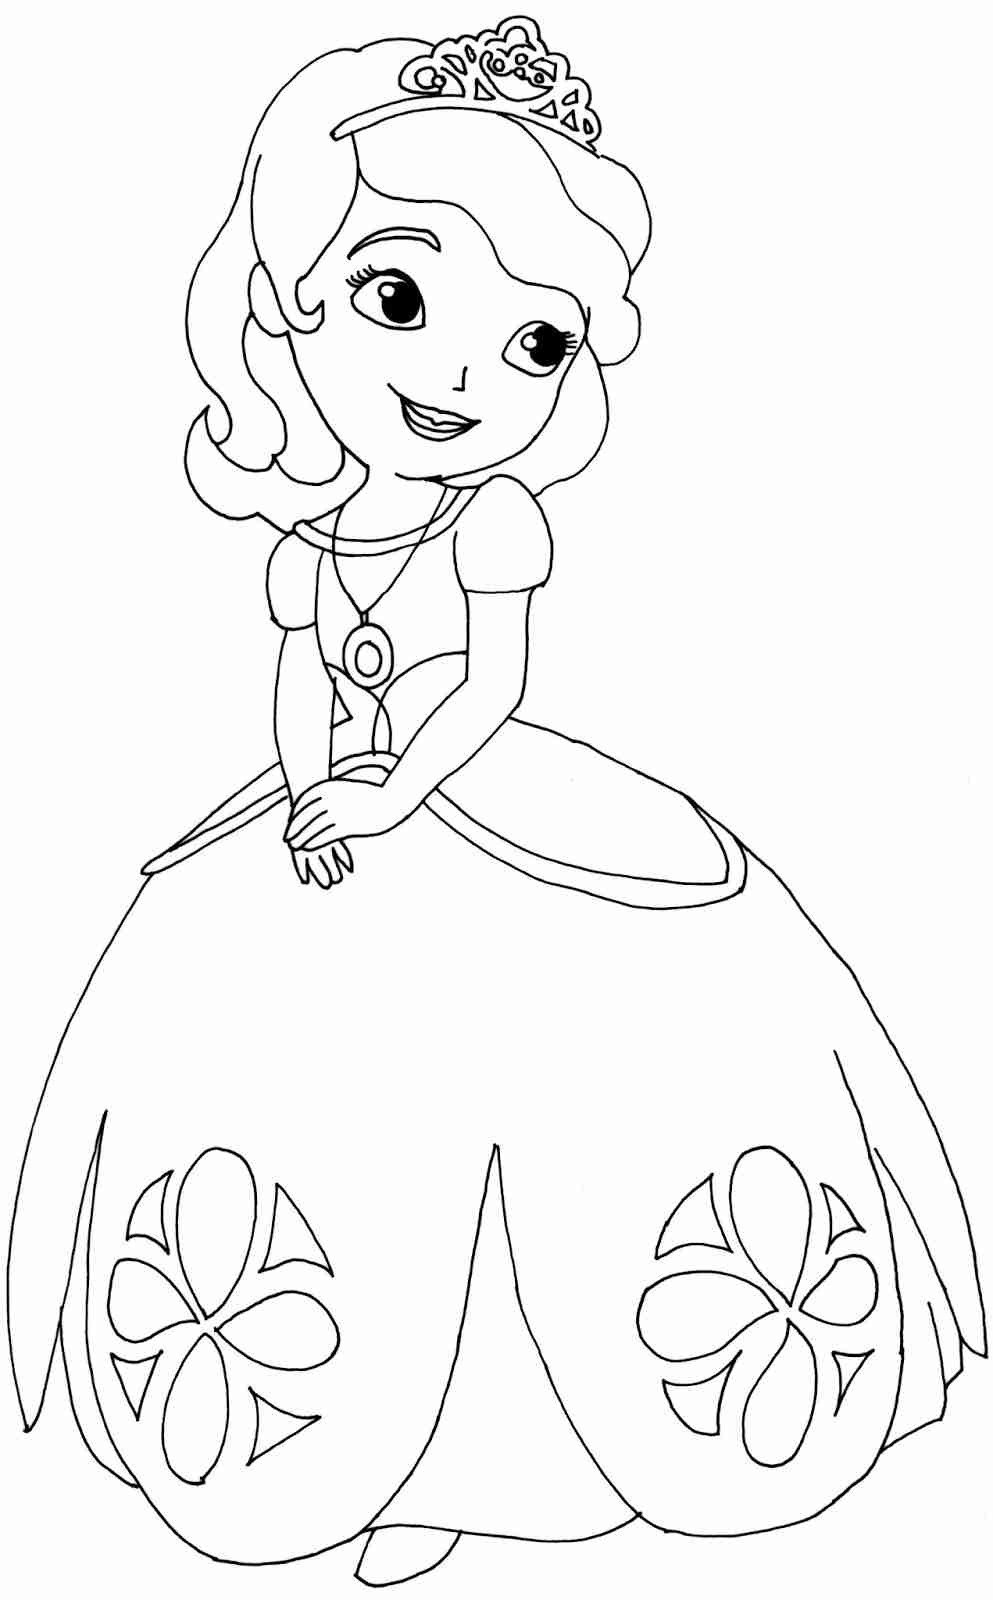 Sofia First Coloring Pages Cartoon Wallpapers Best - Sofia The First Colouring Pages , HD Wallpaper & Backgrounds